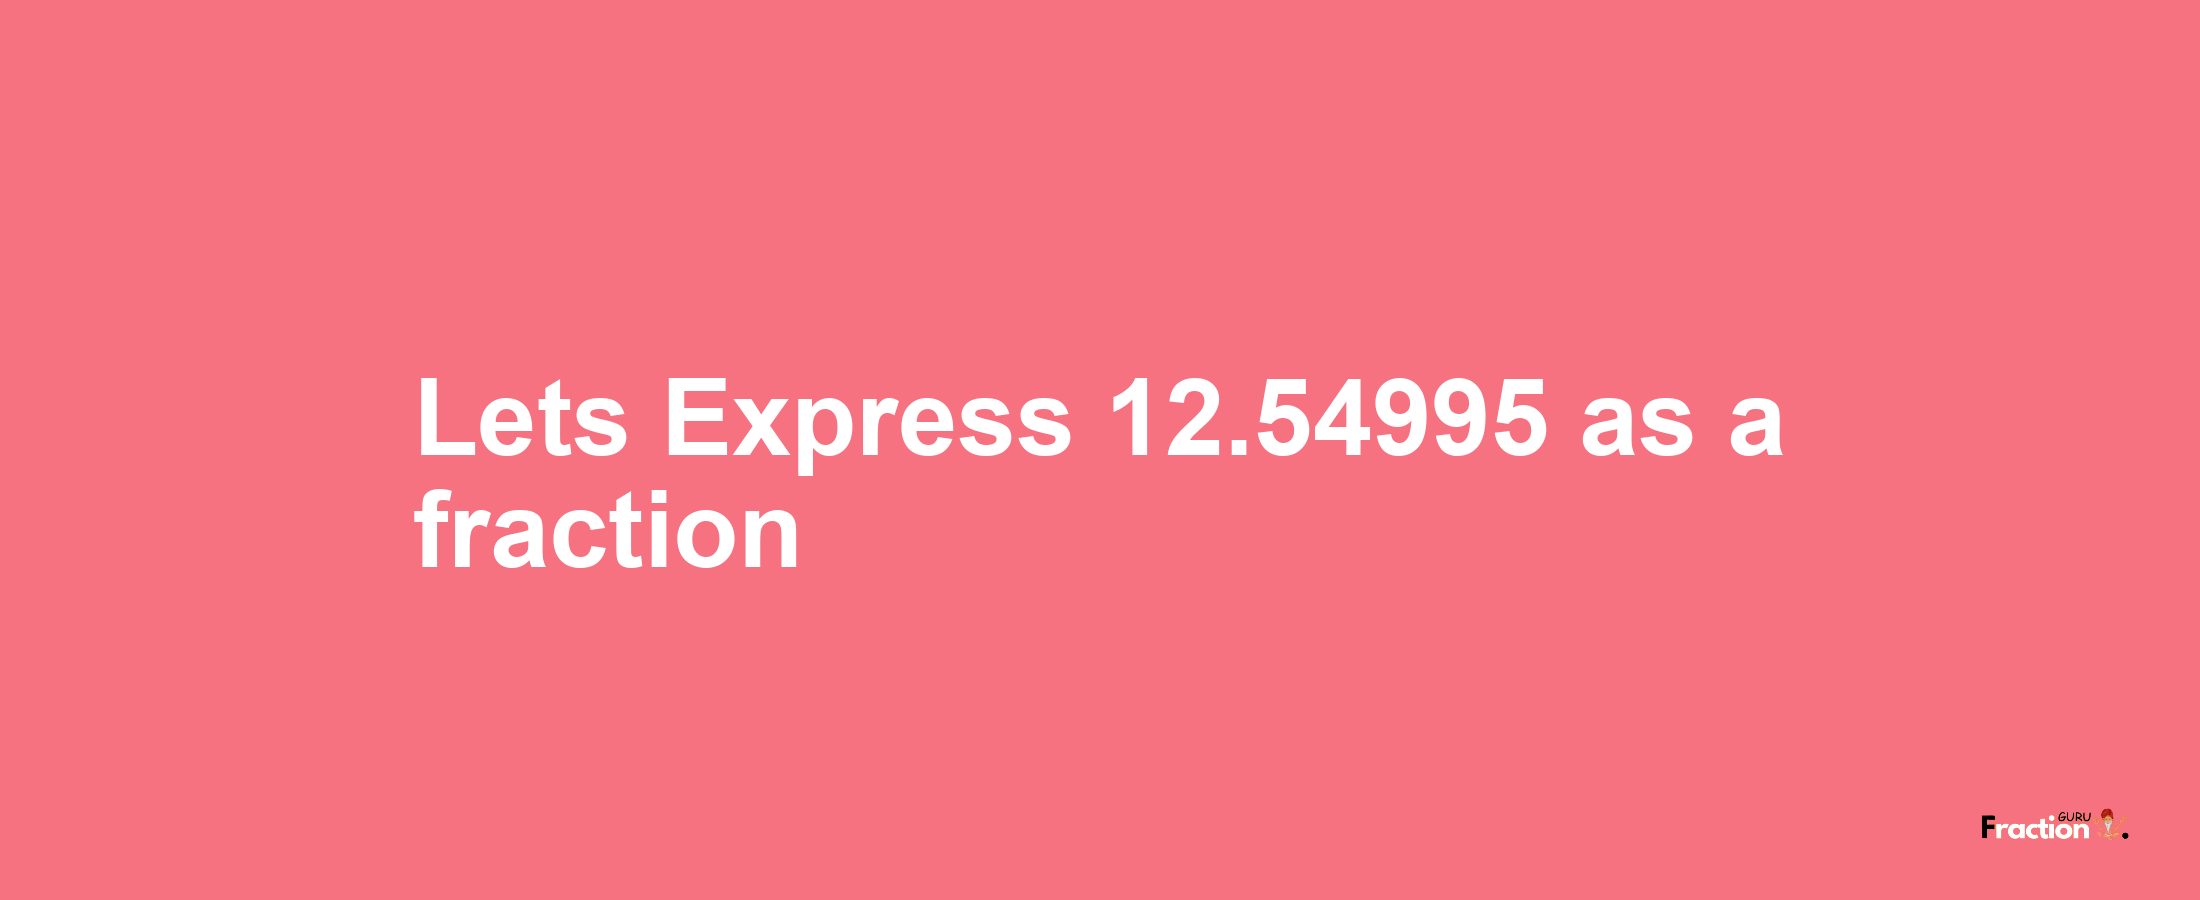 Lets Express 12.54995 as afraction